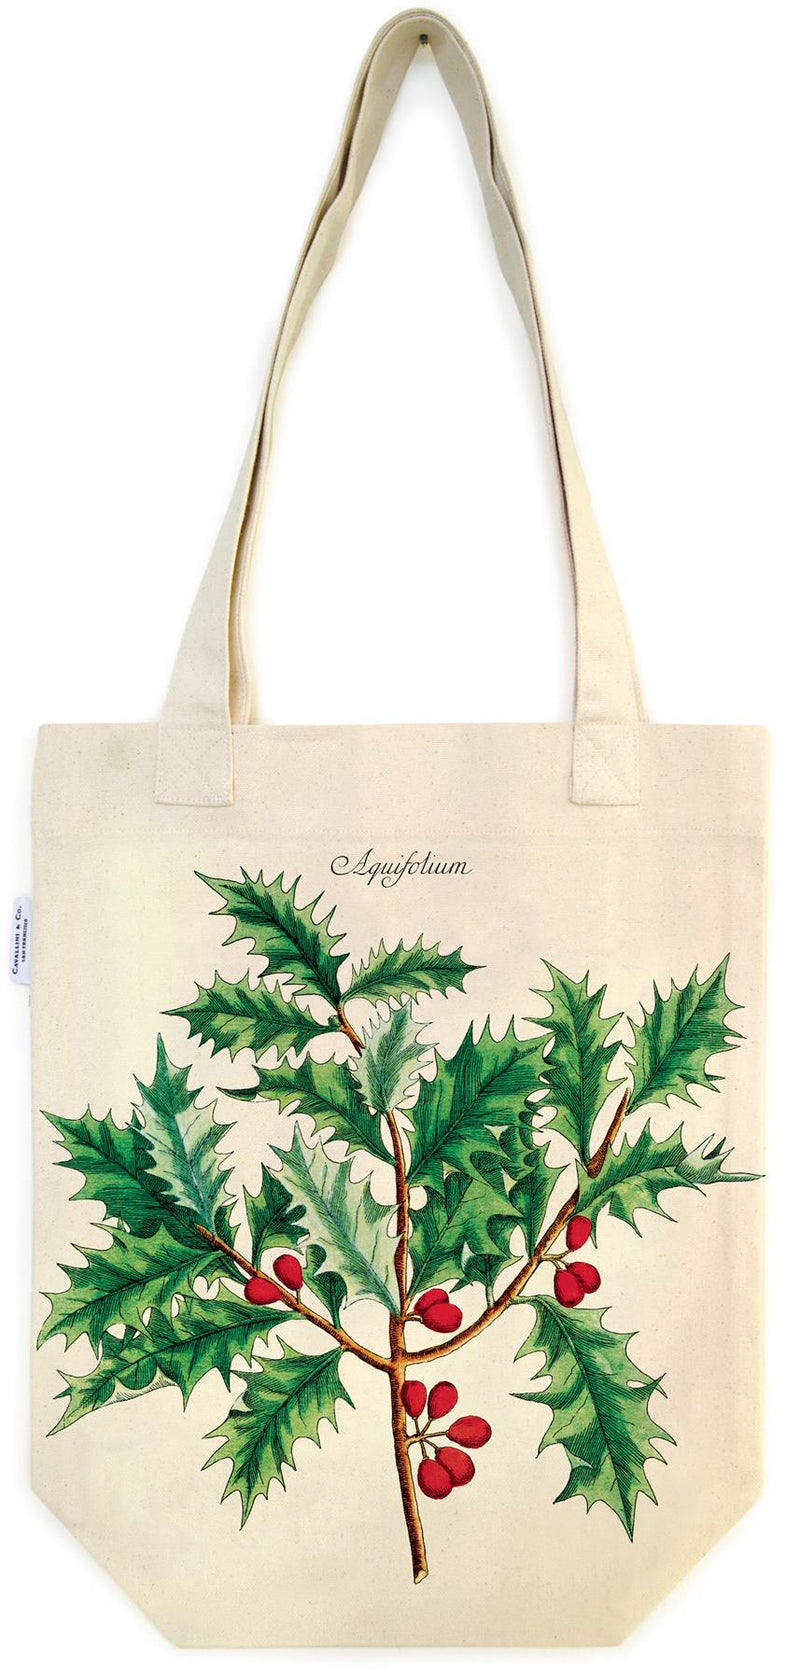 Cavallini - 100% Natural Cotton Vintage Tote Bag - 33x40.5cms - Christmas Holly